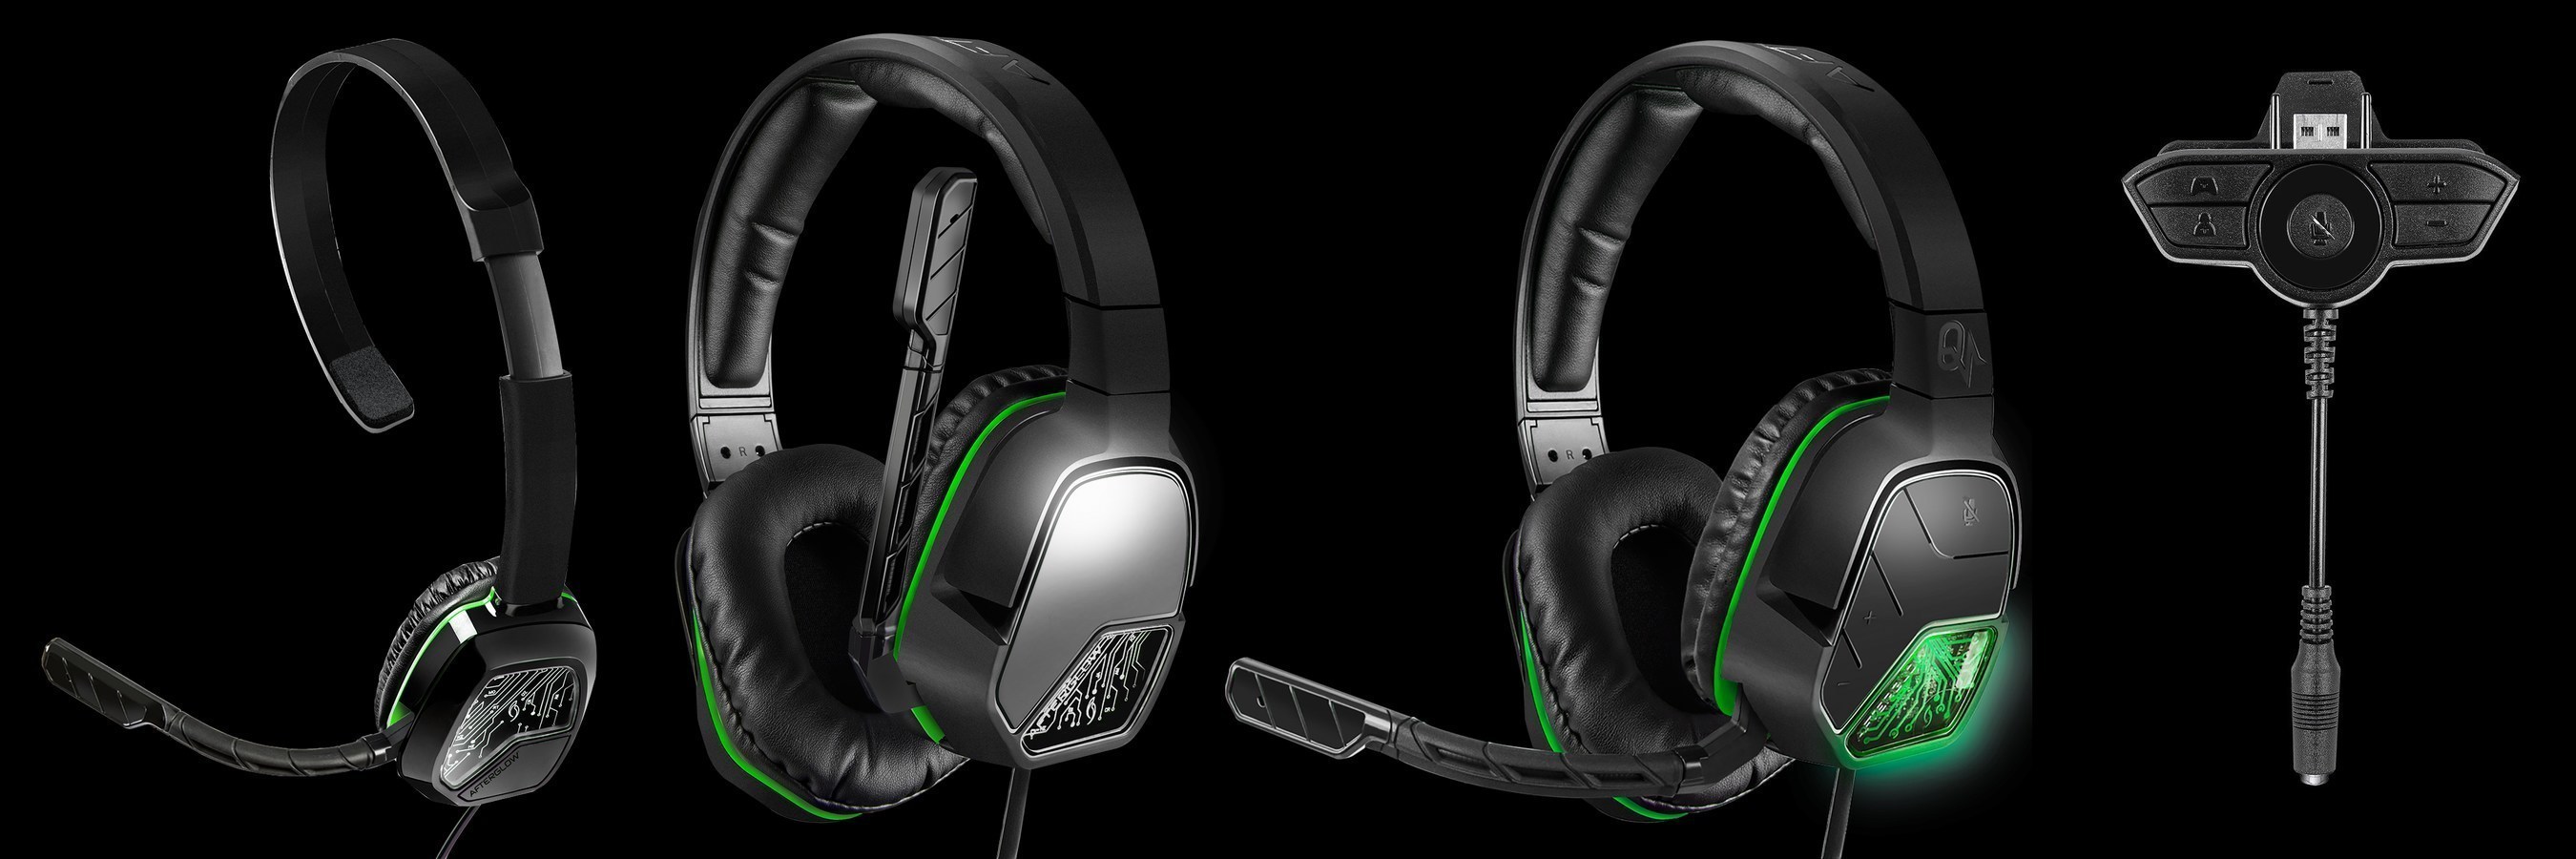 New LVL series headsets from Performance Designed Products (PDP): LVL 1, LVL 3, LVL 5,  and the LVL Headset Adapter for Xbox One.